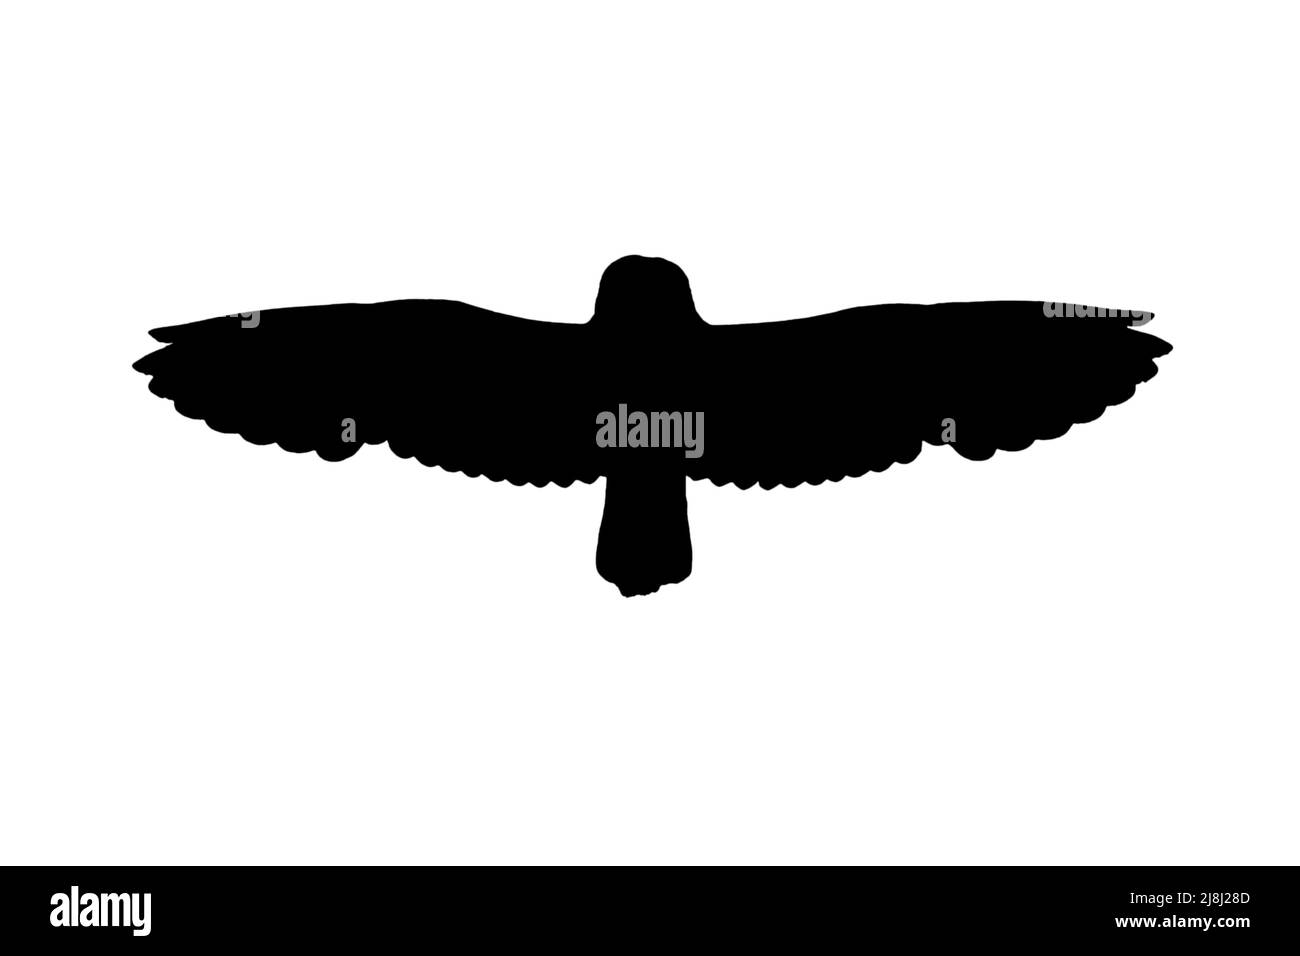 Silhouette of short-eared owl (Asio flammeus / Asio accipitrinus) in flight outlined against white background to show wings, head and tail shapes Stock Photo